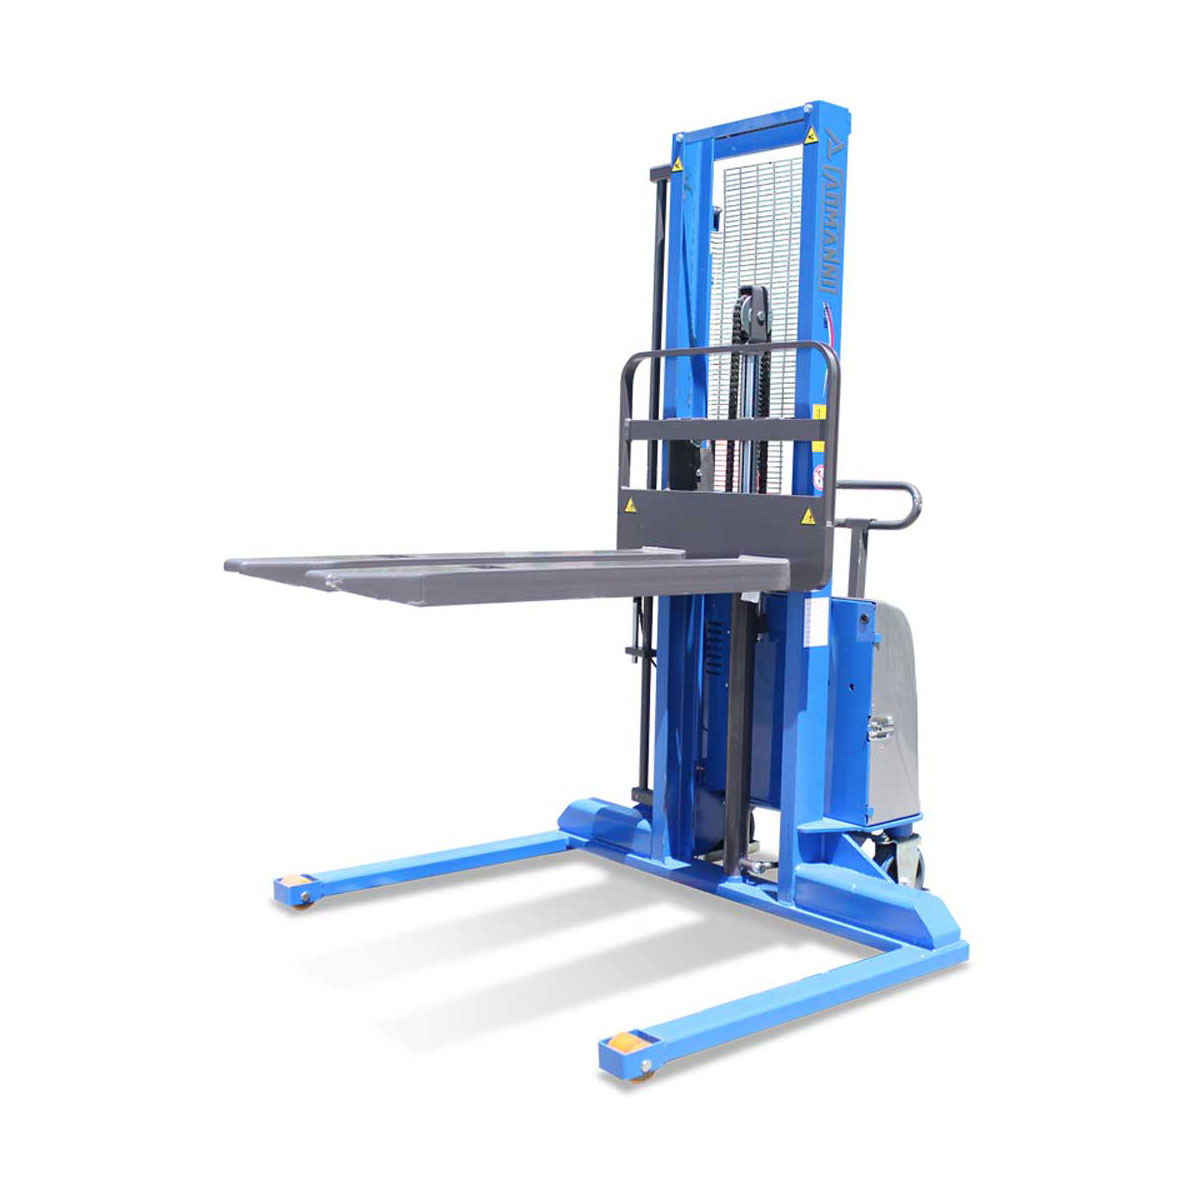 Buy Semi-Electric Straddle Stacker in Pallet Stackers from Armanni available at Astrolift NZ